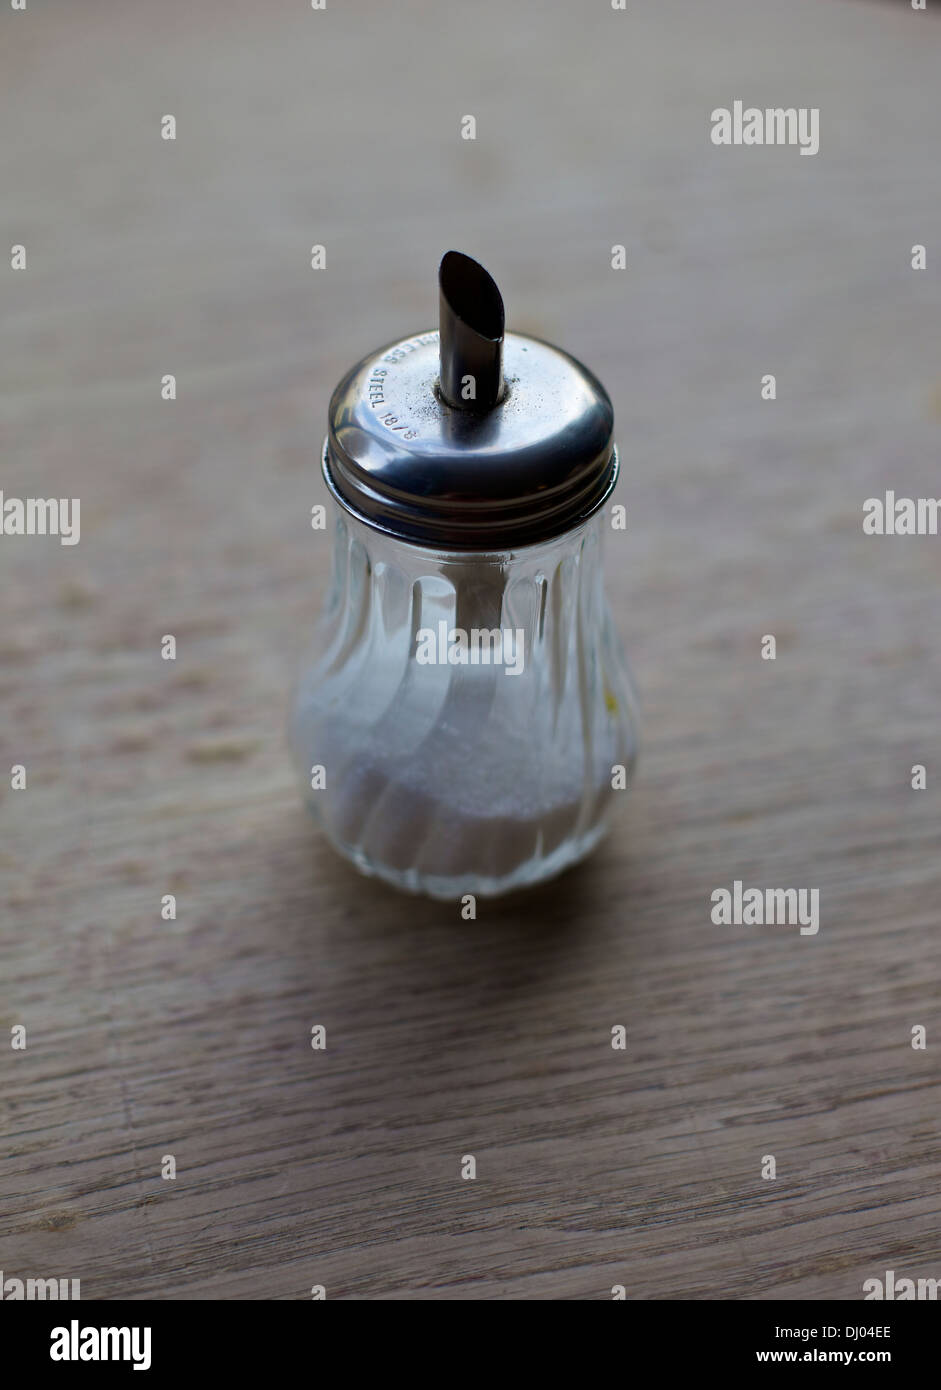 Diner style sugar pourer dispenser on wooden table at posh cafe Stock Photo